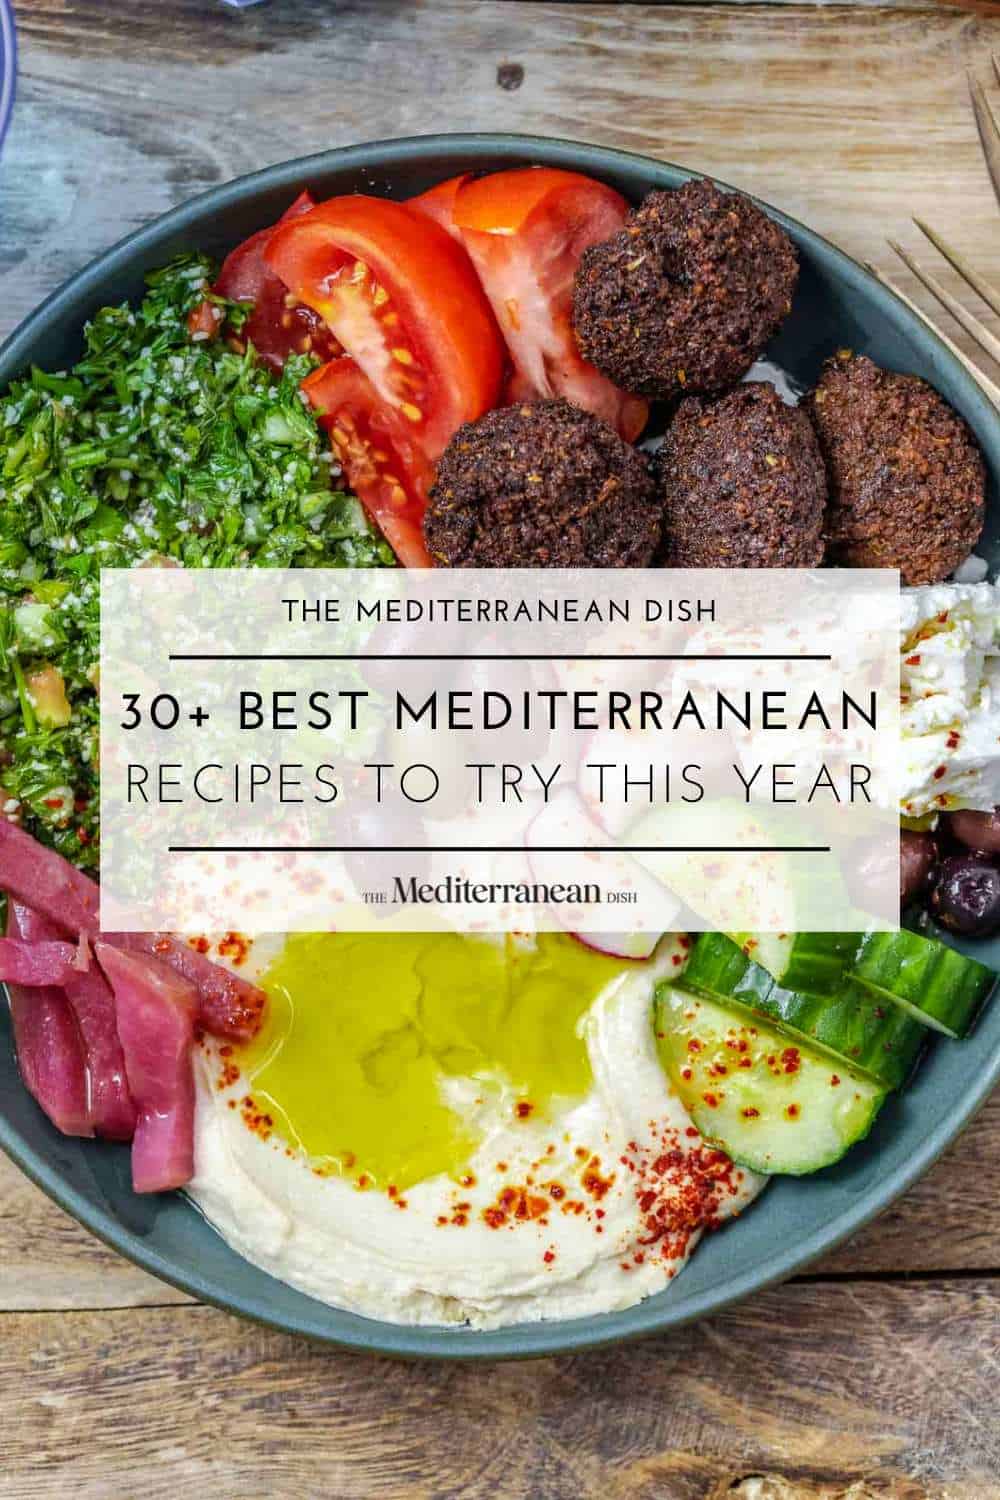 What Sweets Can You Eat On Mediterranean Diet?